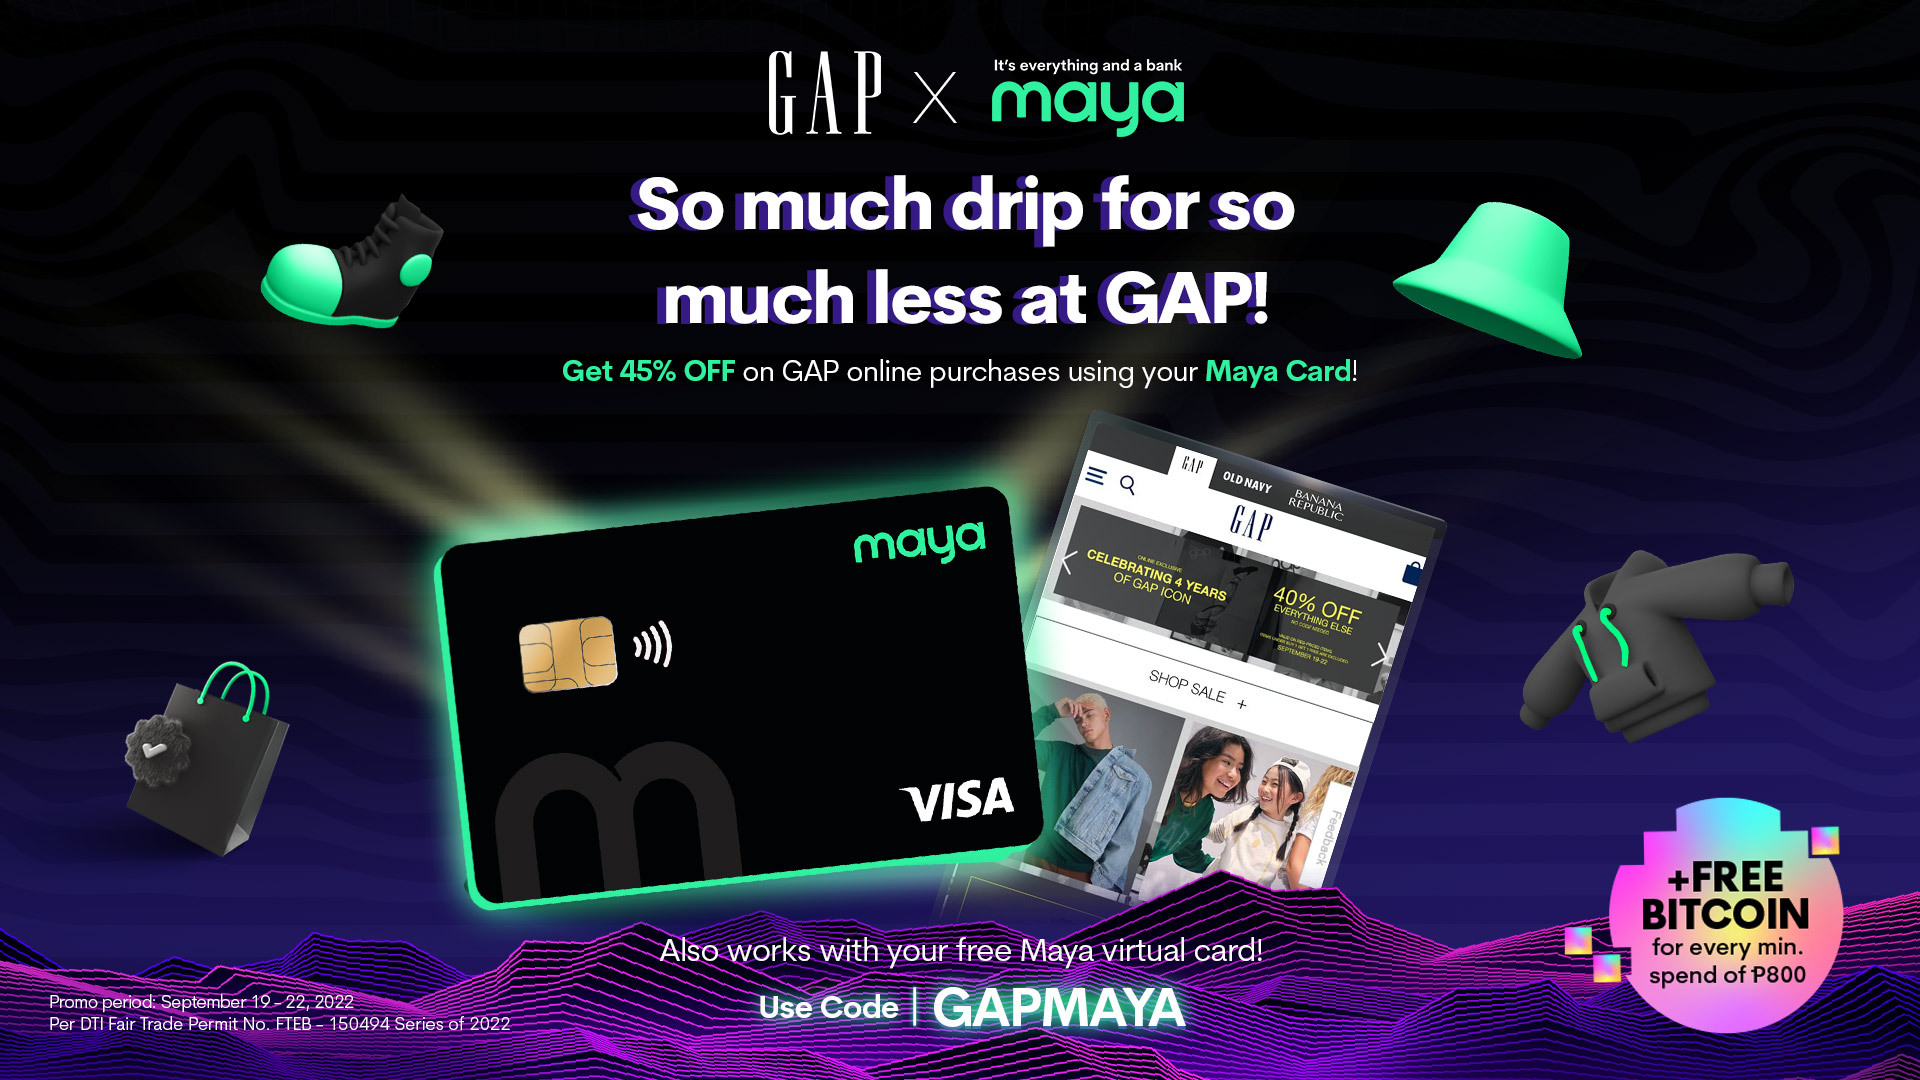 Get 45% OFF on GAP with your Maya Card!